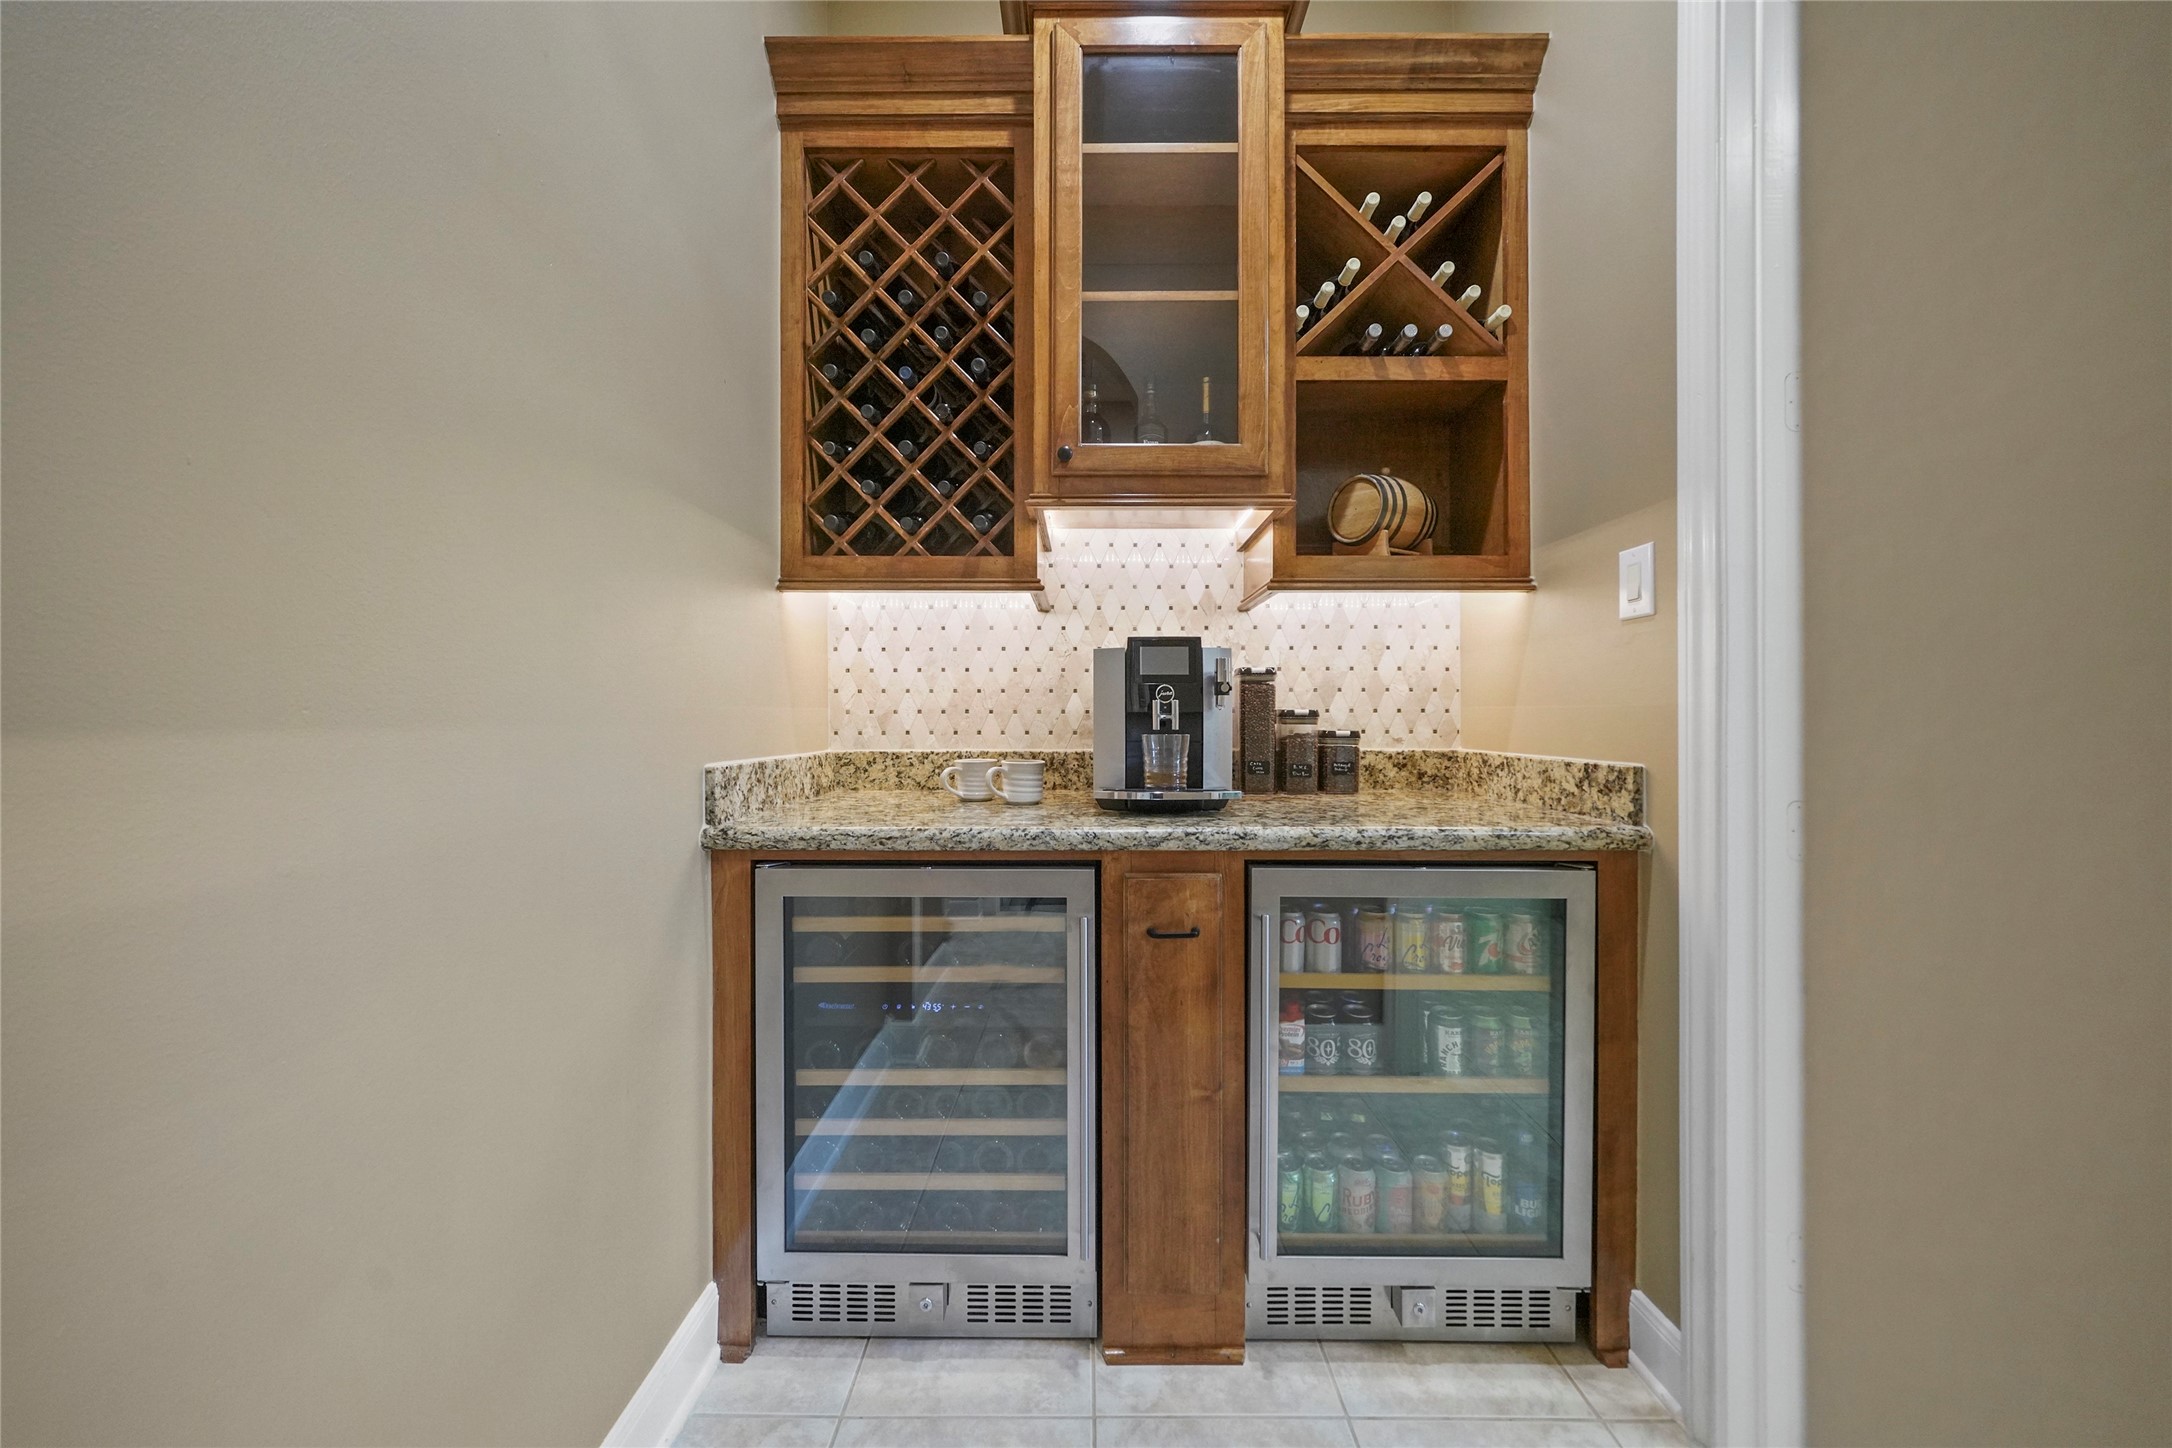 The custom beverage center offers a convenient and stylish space to house your tastiest beverages and finest spirits.